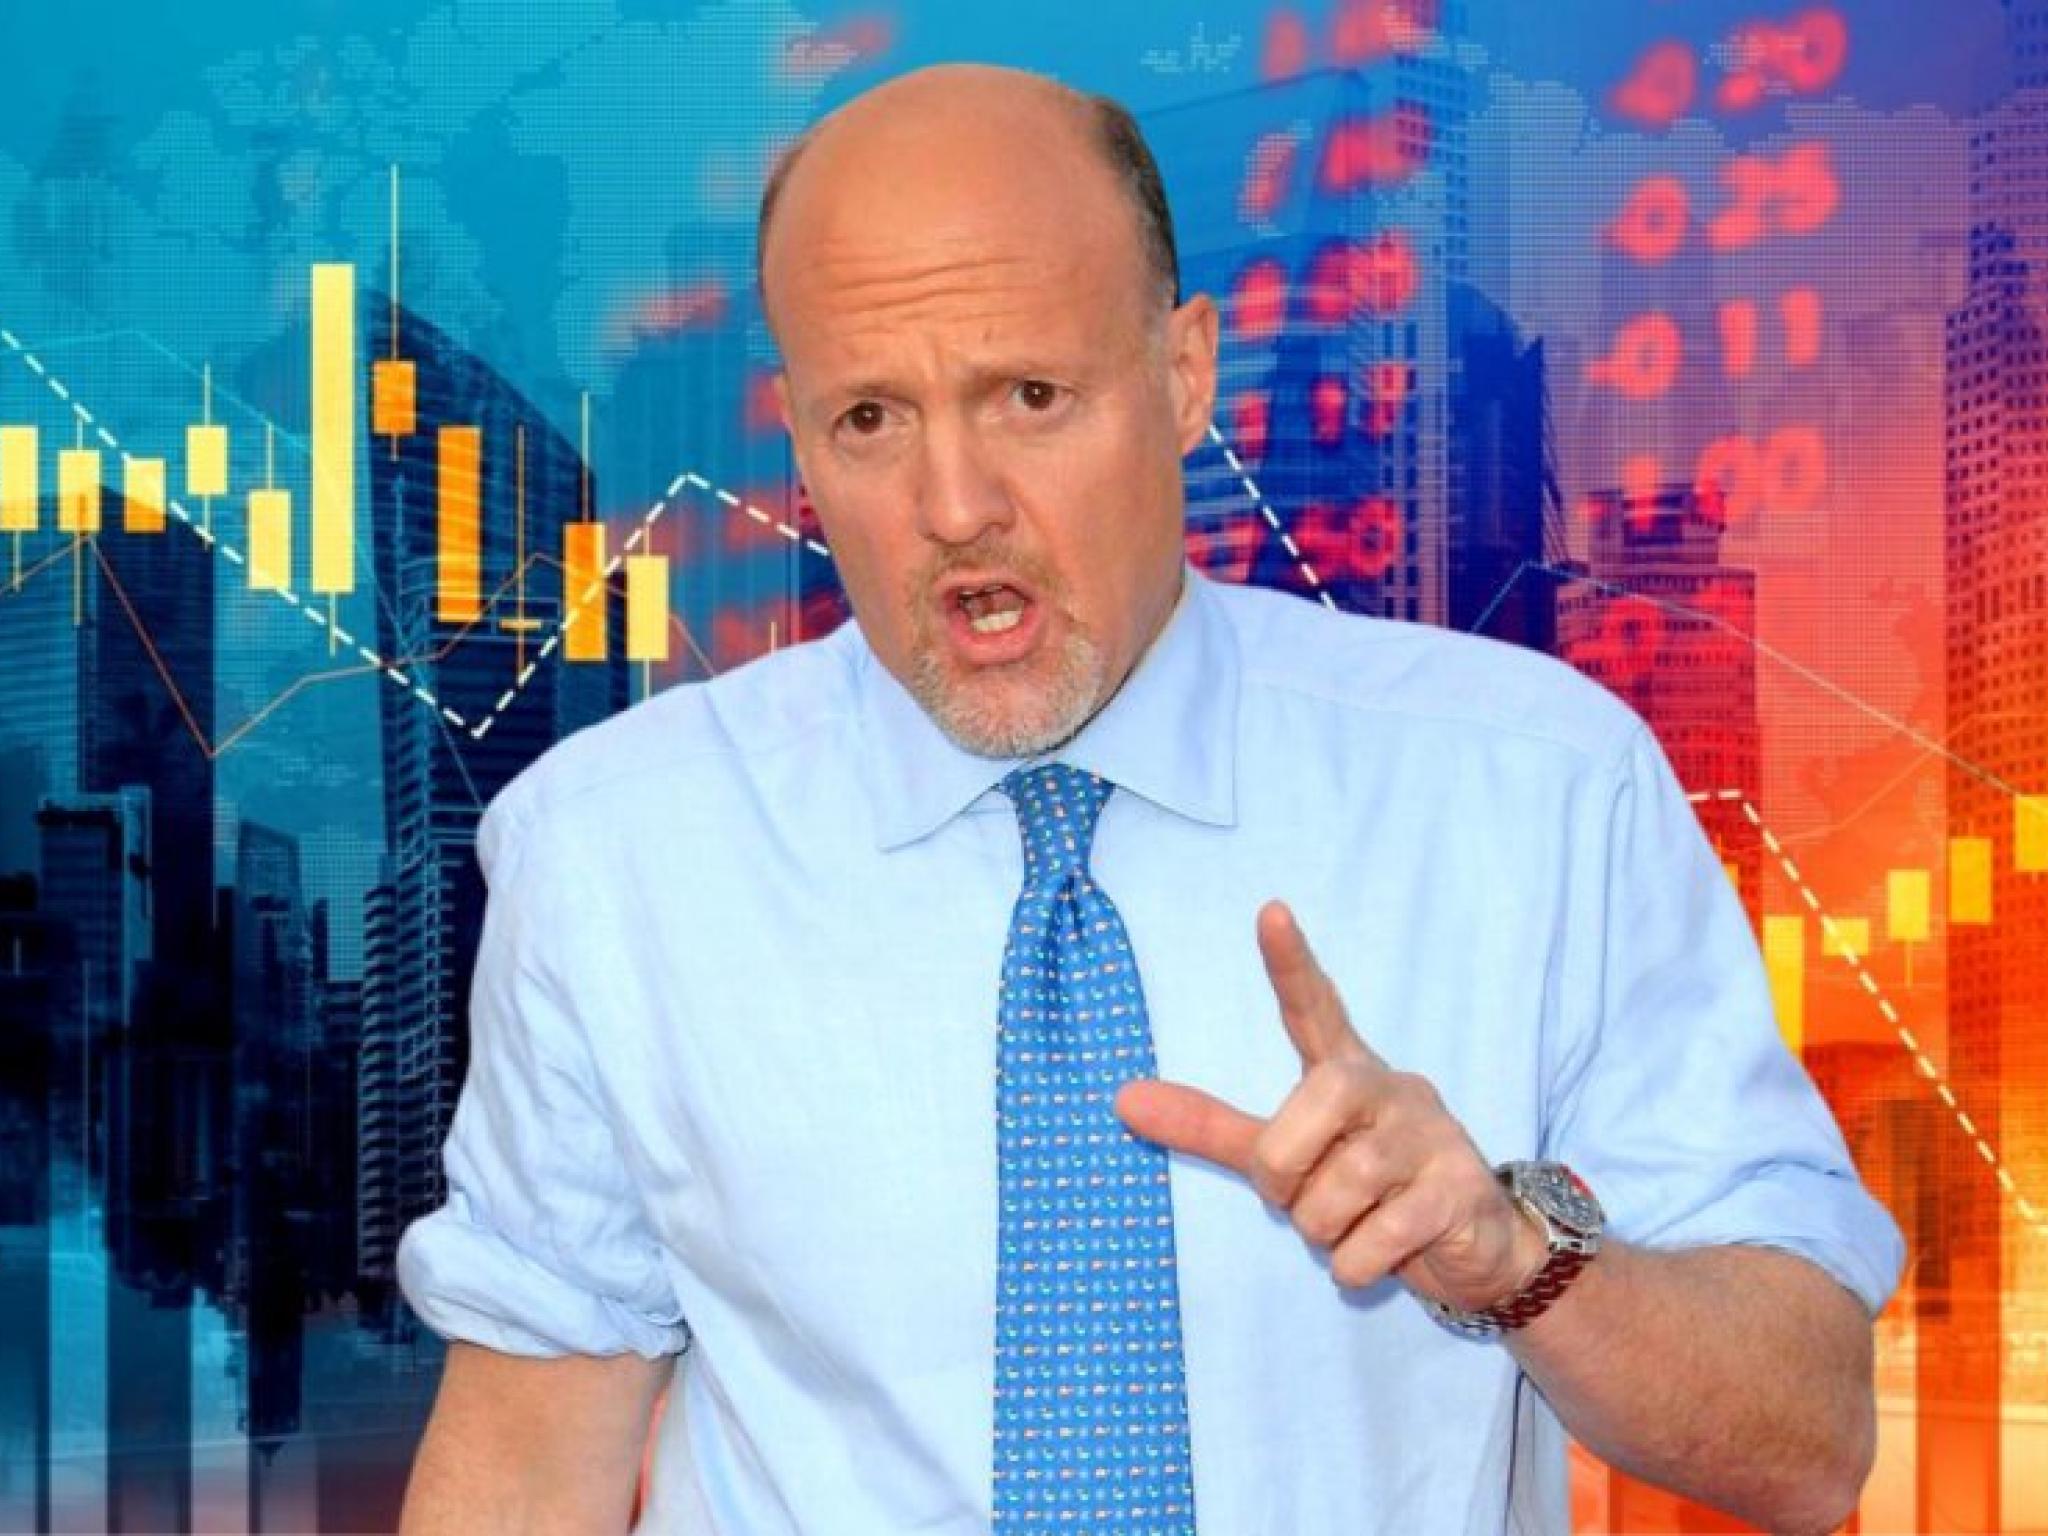  amds-results-proved-our-plan-to-reinvest-in-the-stock-was-right-says-jim-cramer-who-credits-lisa-su-as-key-factor-in-chip-makers-success 